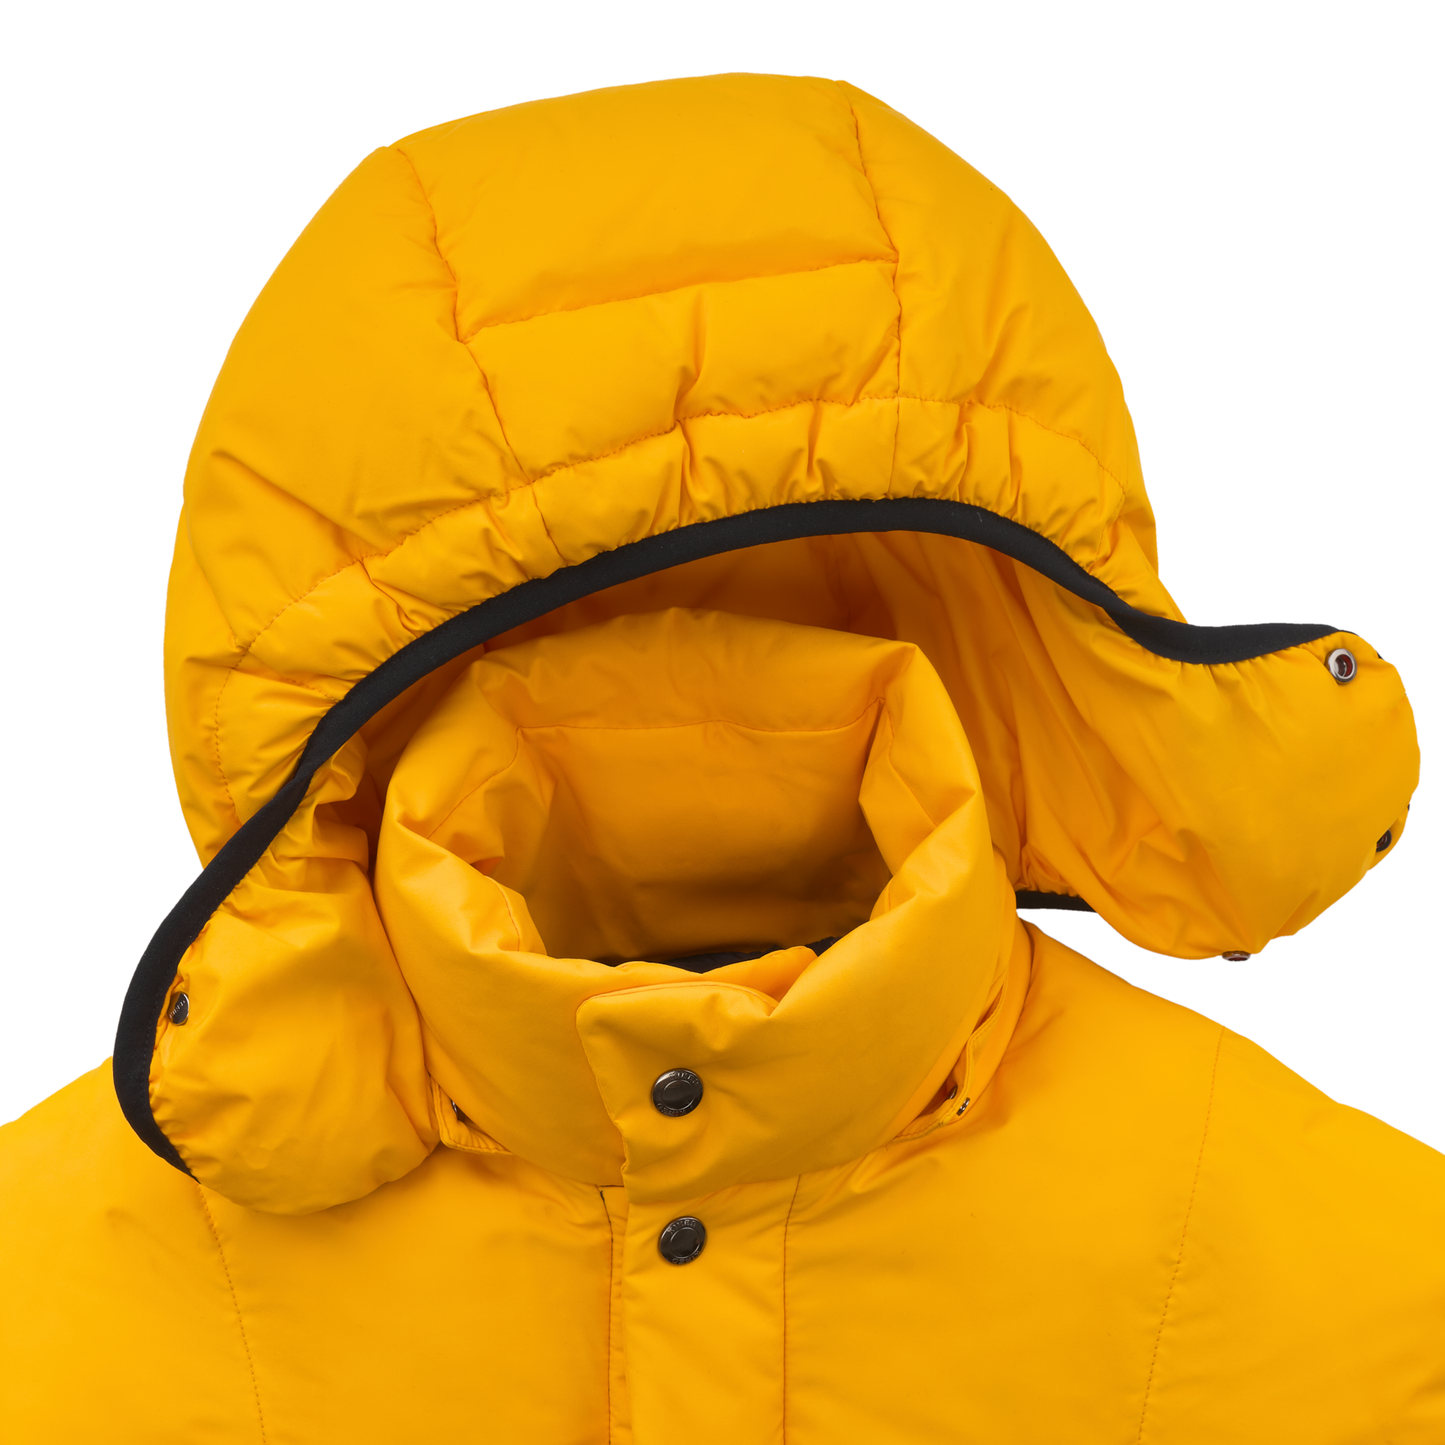 Kired Quilted Shell Hooded Down Jacket in Yellow and Dark Blue - SARTALE